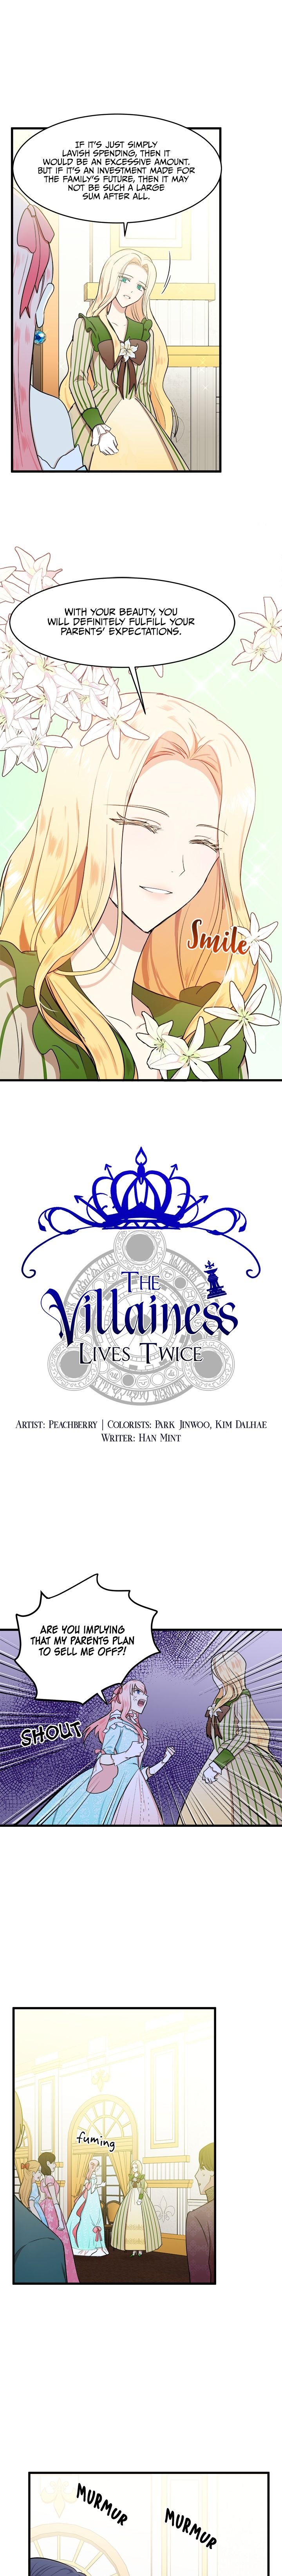 the-villainess-lives-twice-chap-12-6